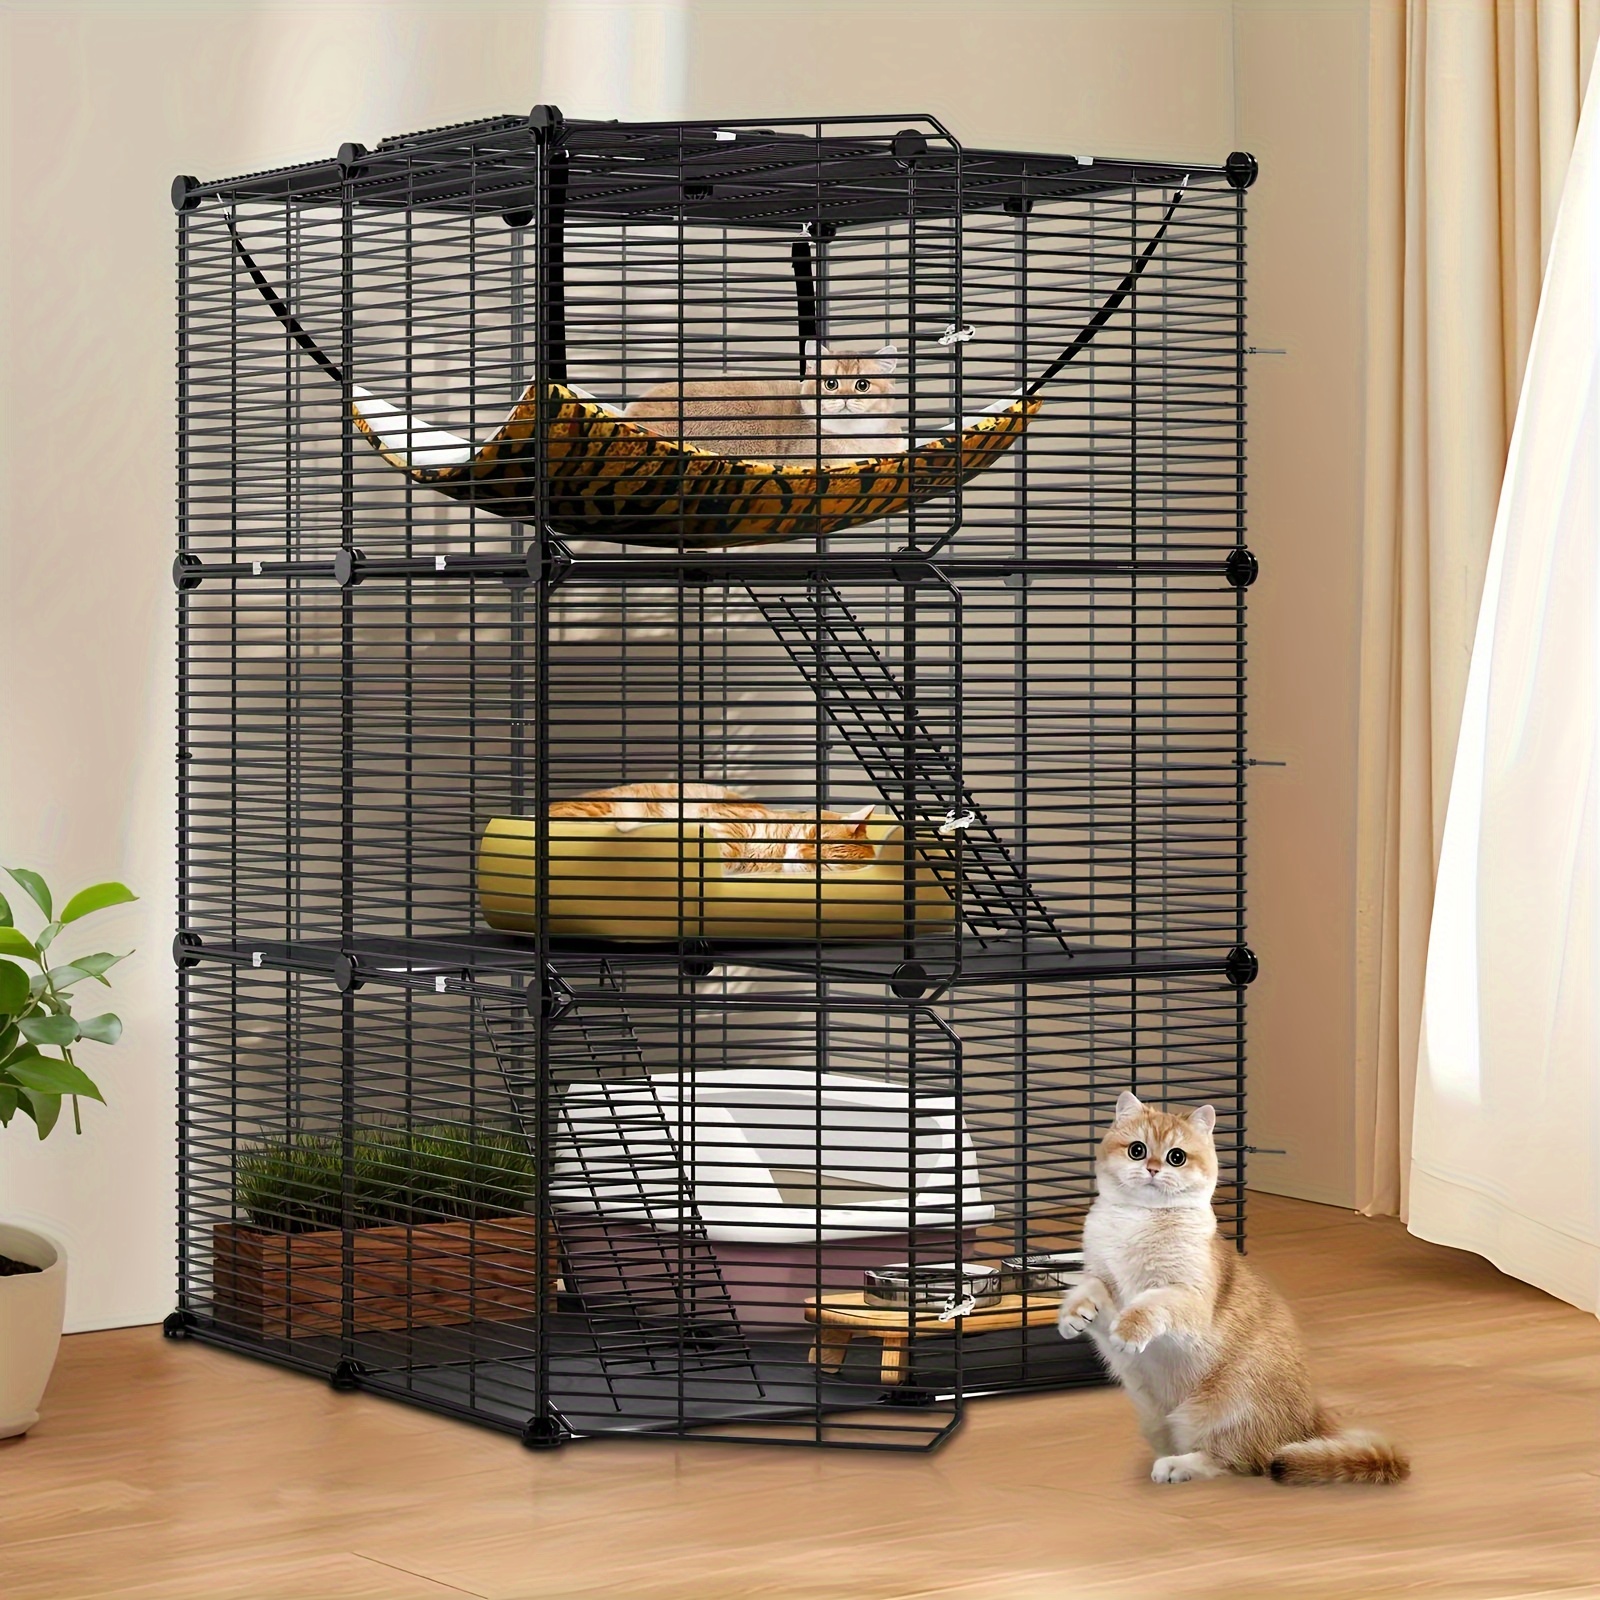 

Indoor Cat Cage With Extra Large Hammock For 1- 2 Cats- Diy Cat Enclosure With Extra Large Hammock For Multiple Small Animals Cats, Ferret, Chinchilla, Rabbit, (28"l X 28"w X 41"h, Black)